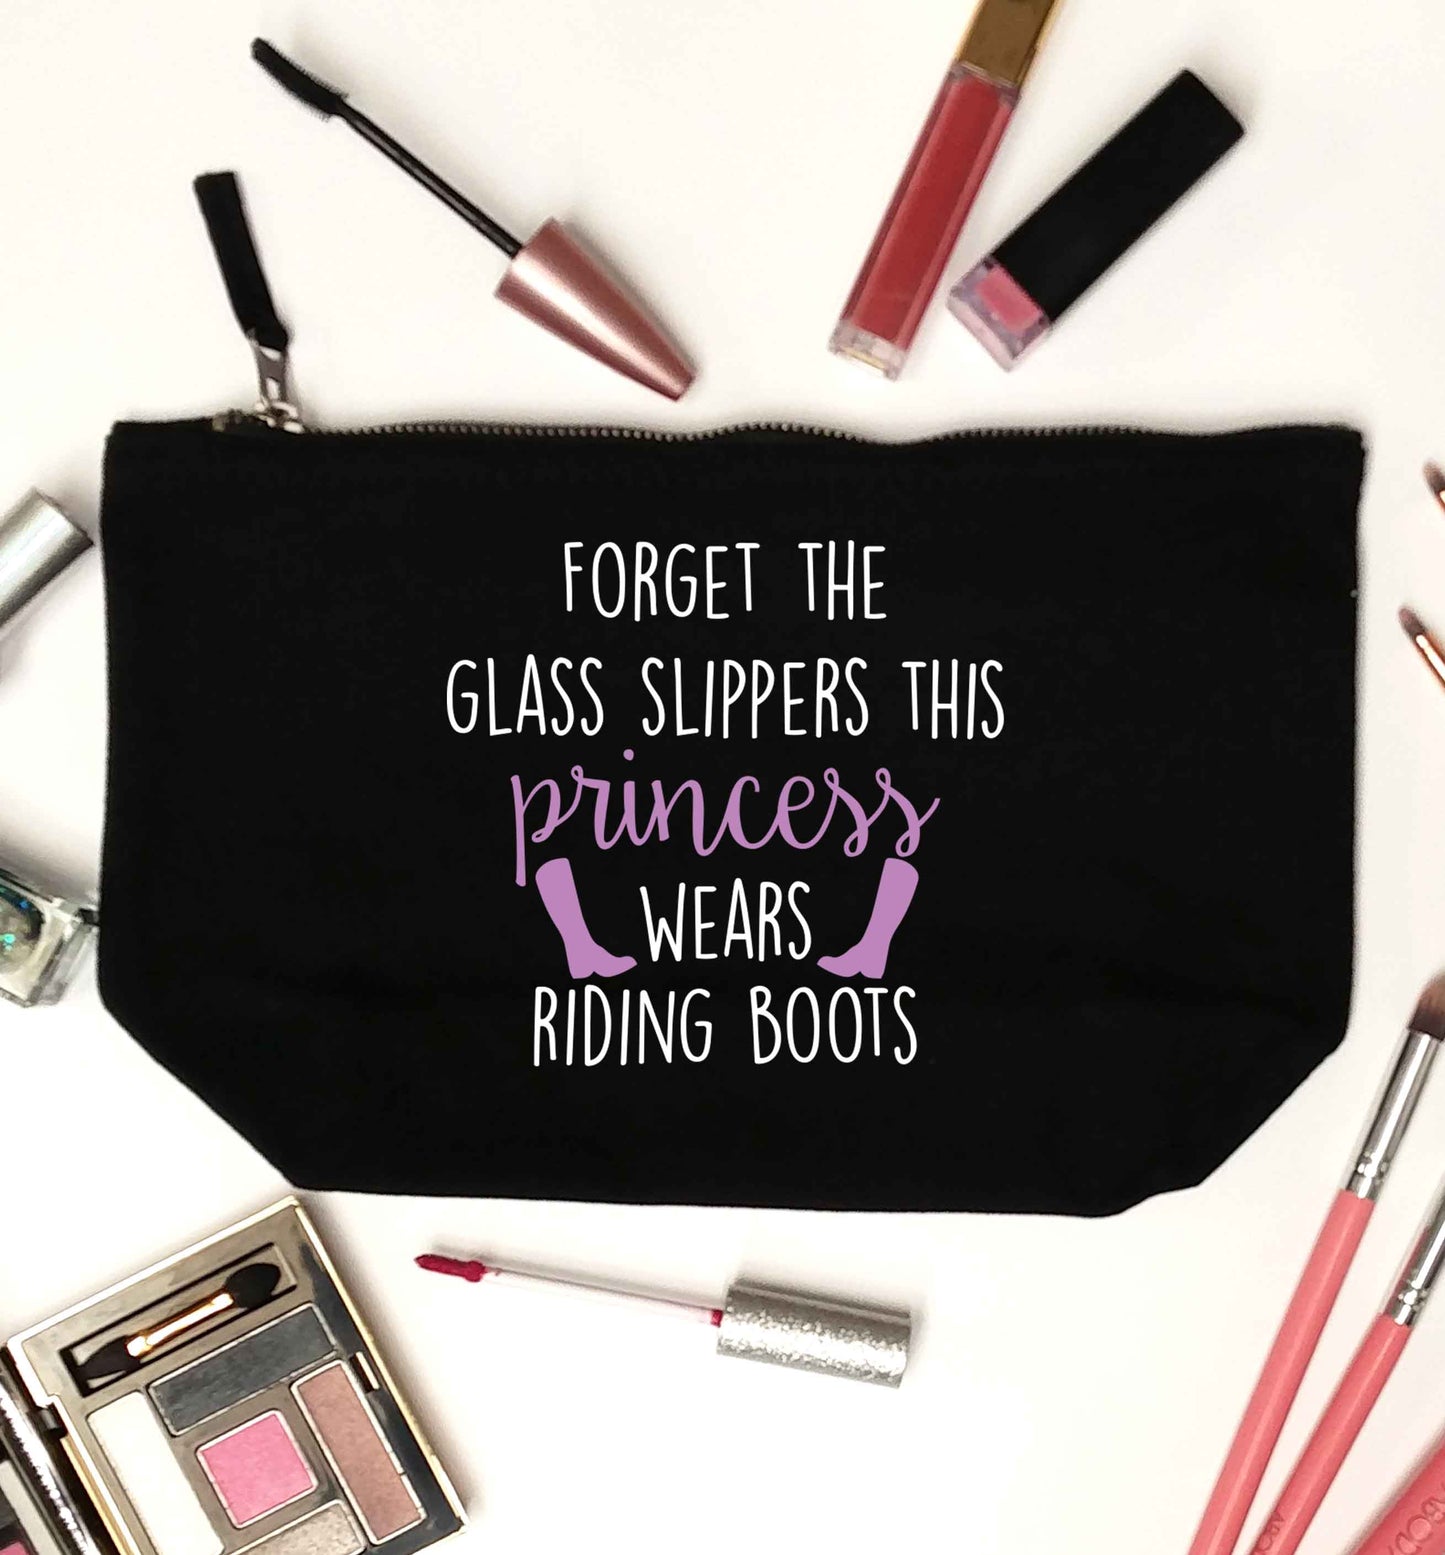 Forget the glass slippers this princess wears riding boots black makeup bag